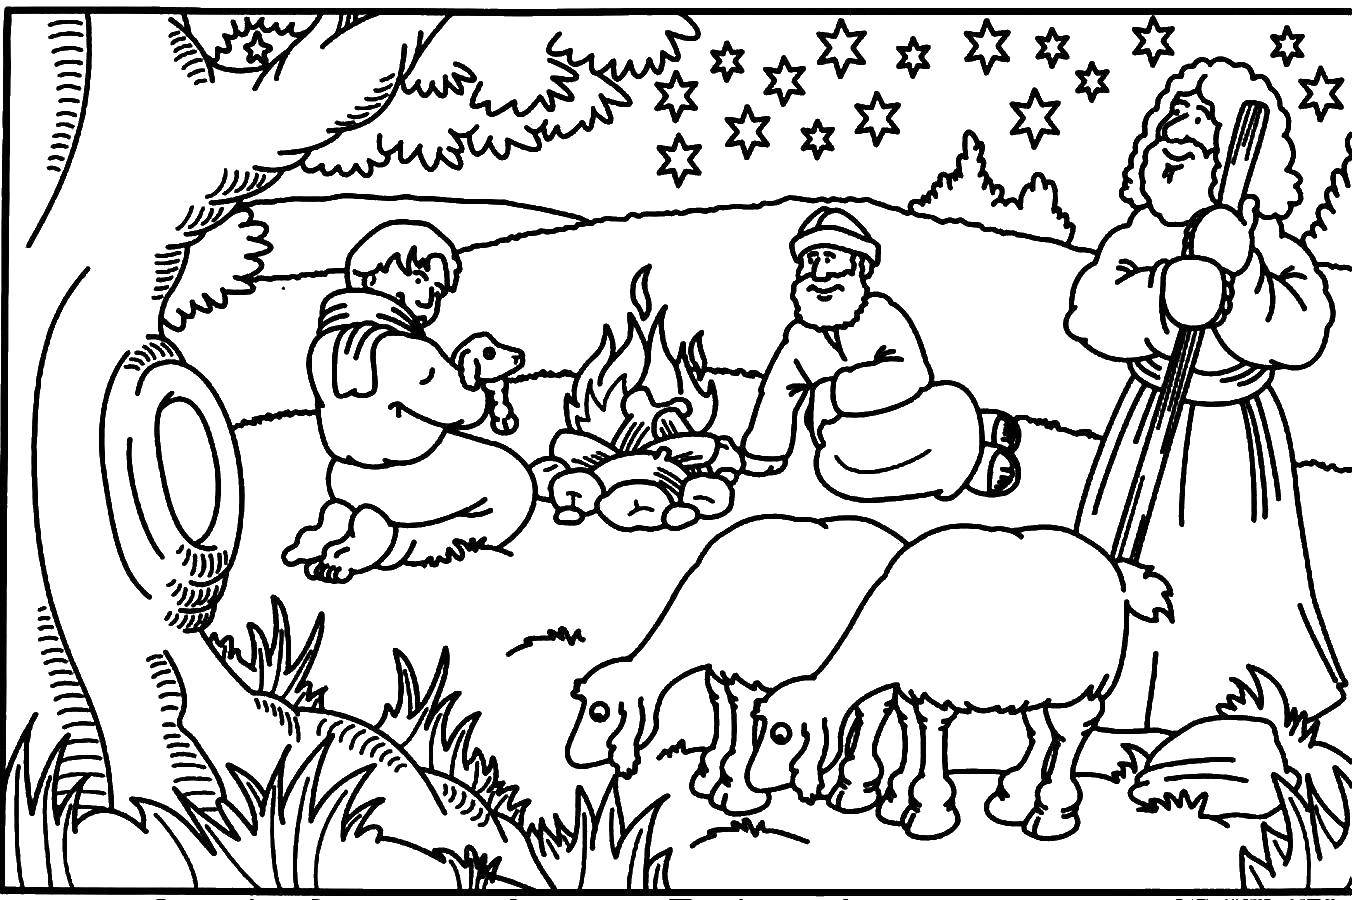 Coloring The shepherds by the fire. Category People. Tags:  shepherd, sheep.